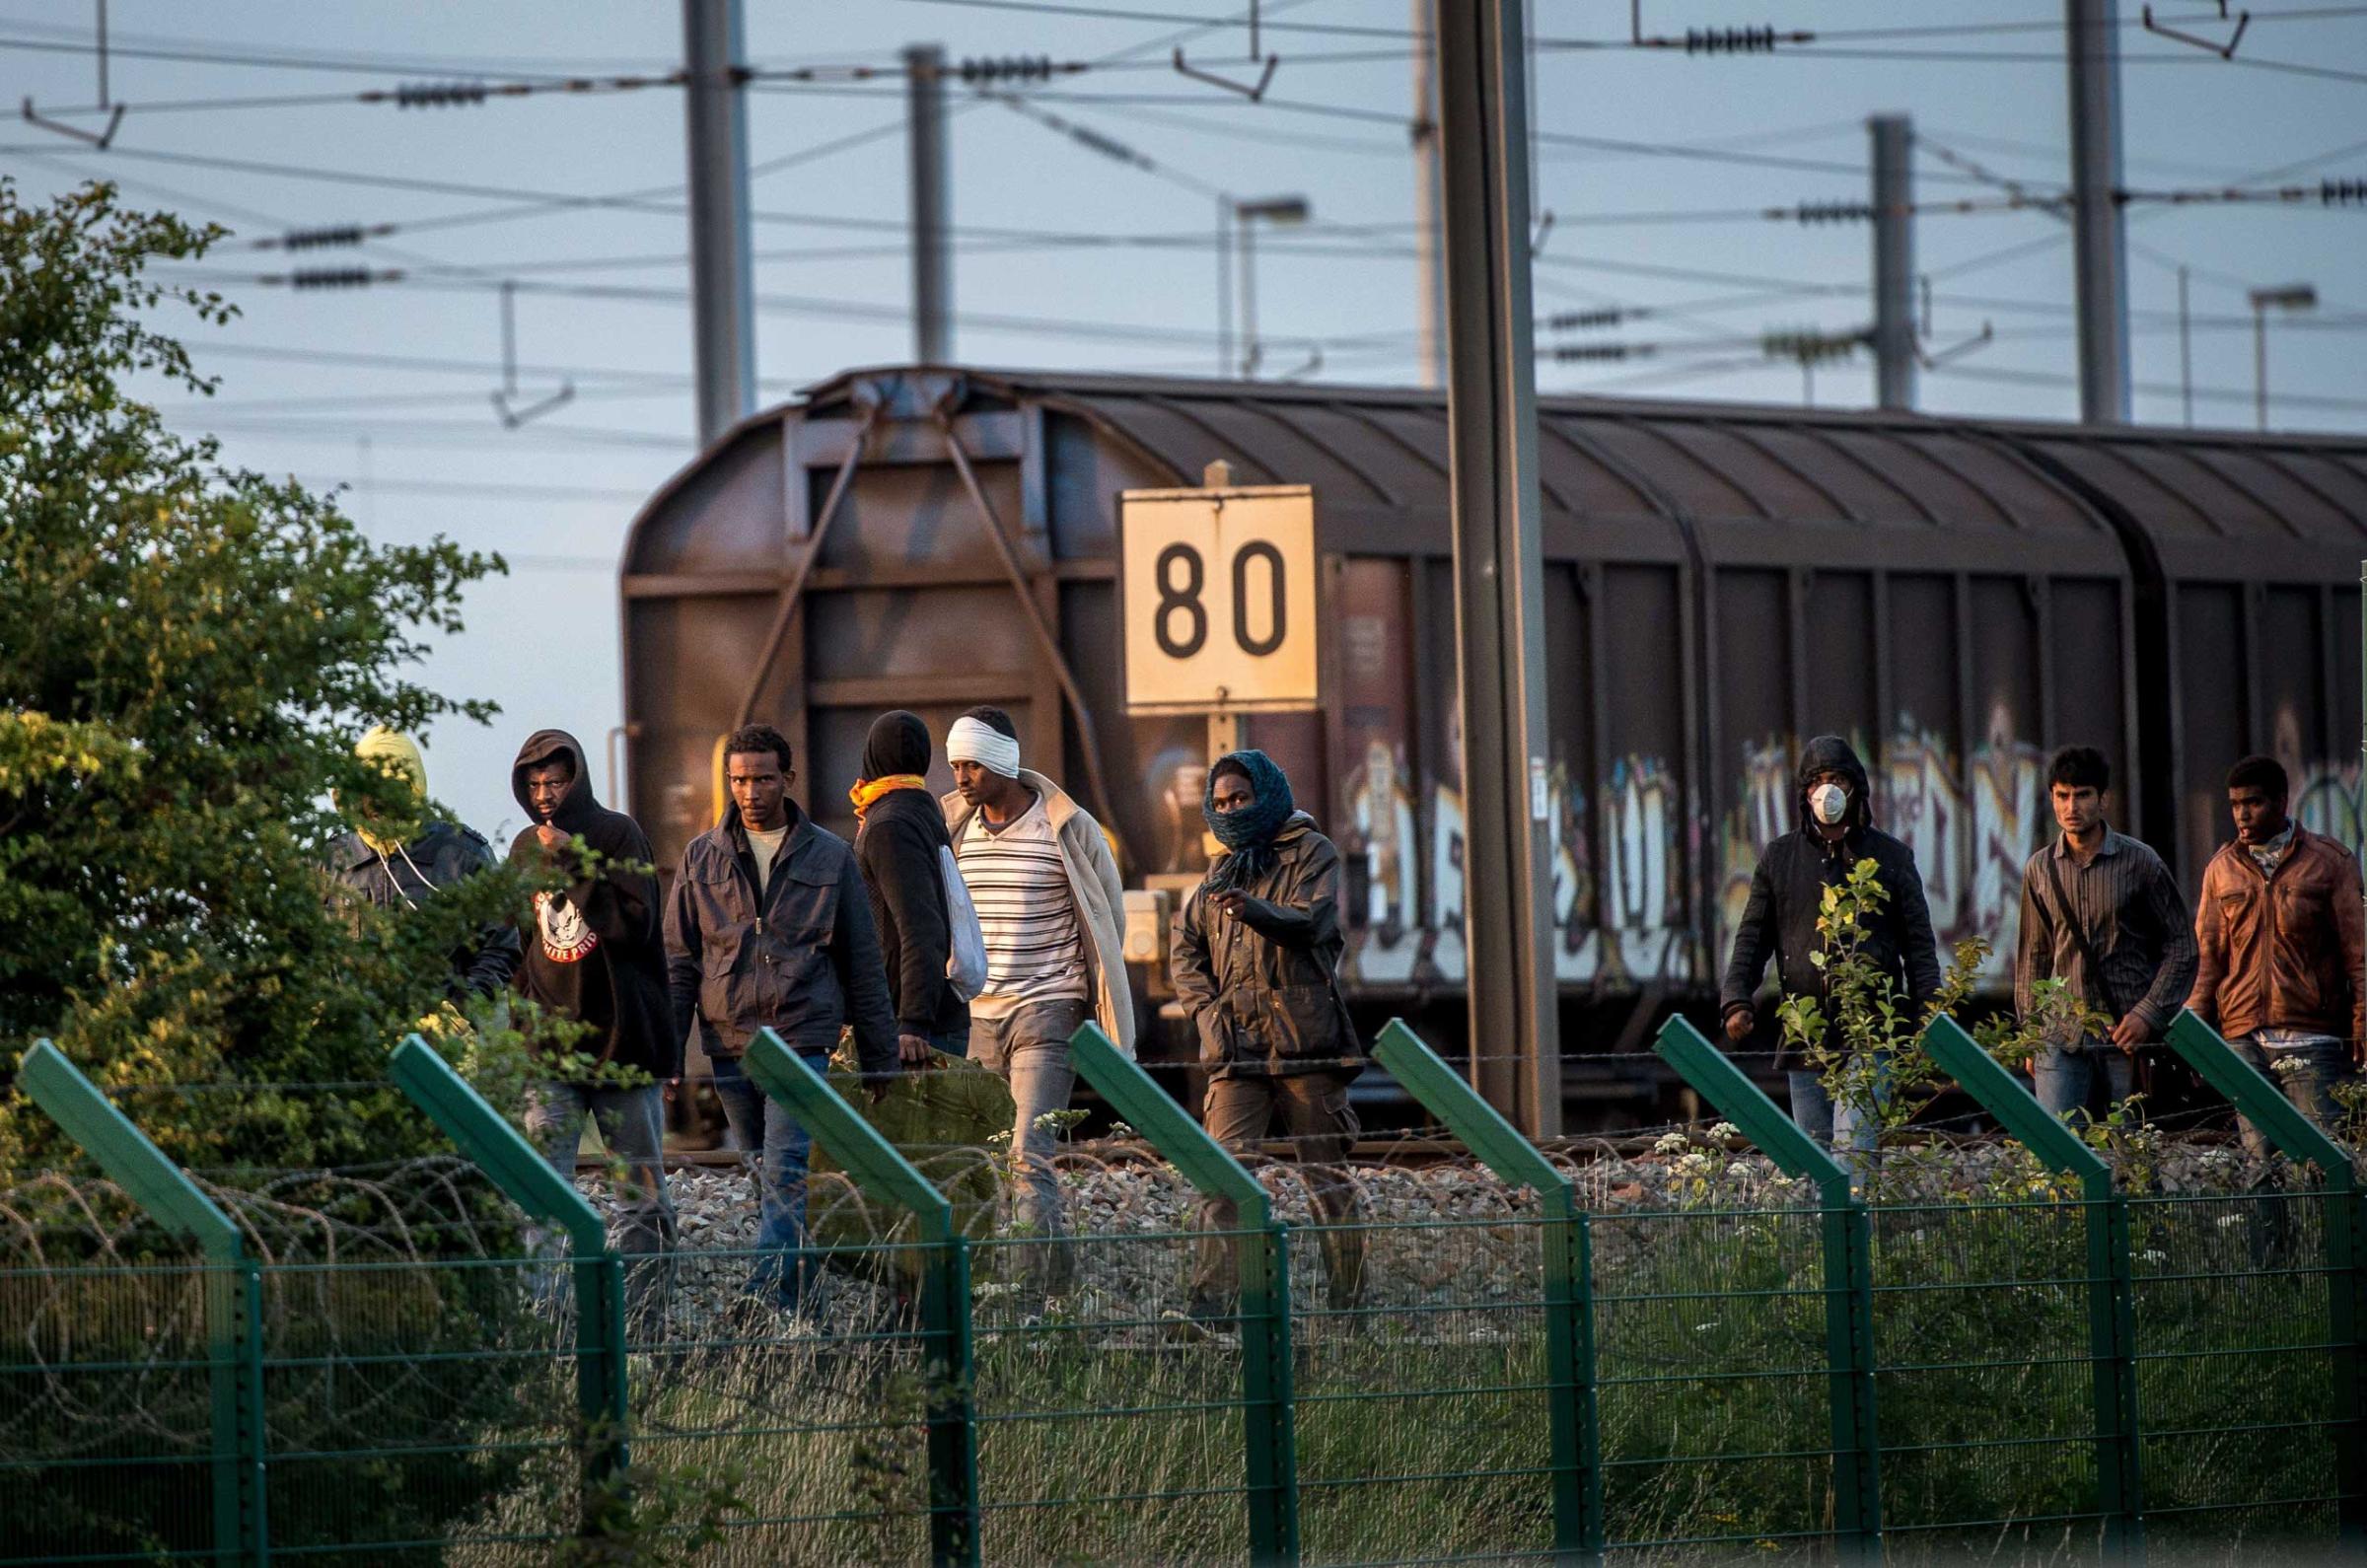 Calais Channel Tunnel migrants